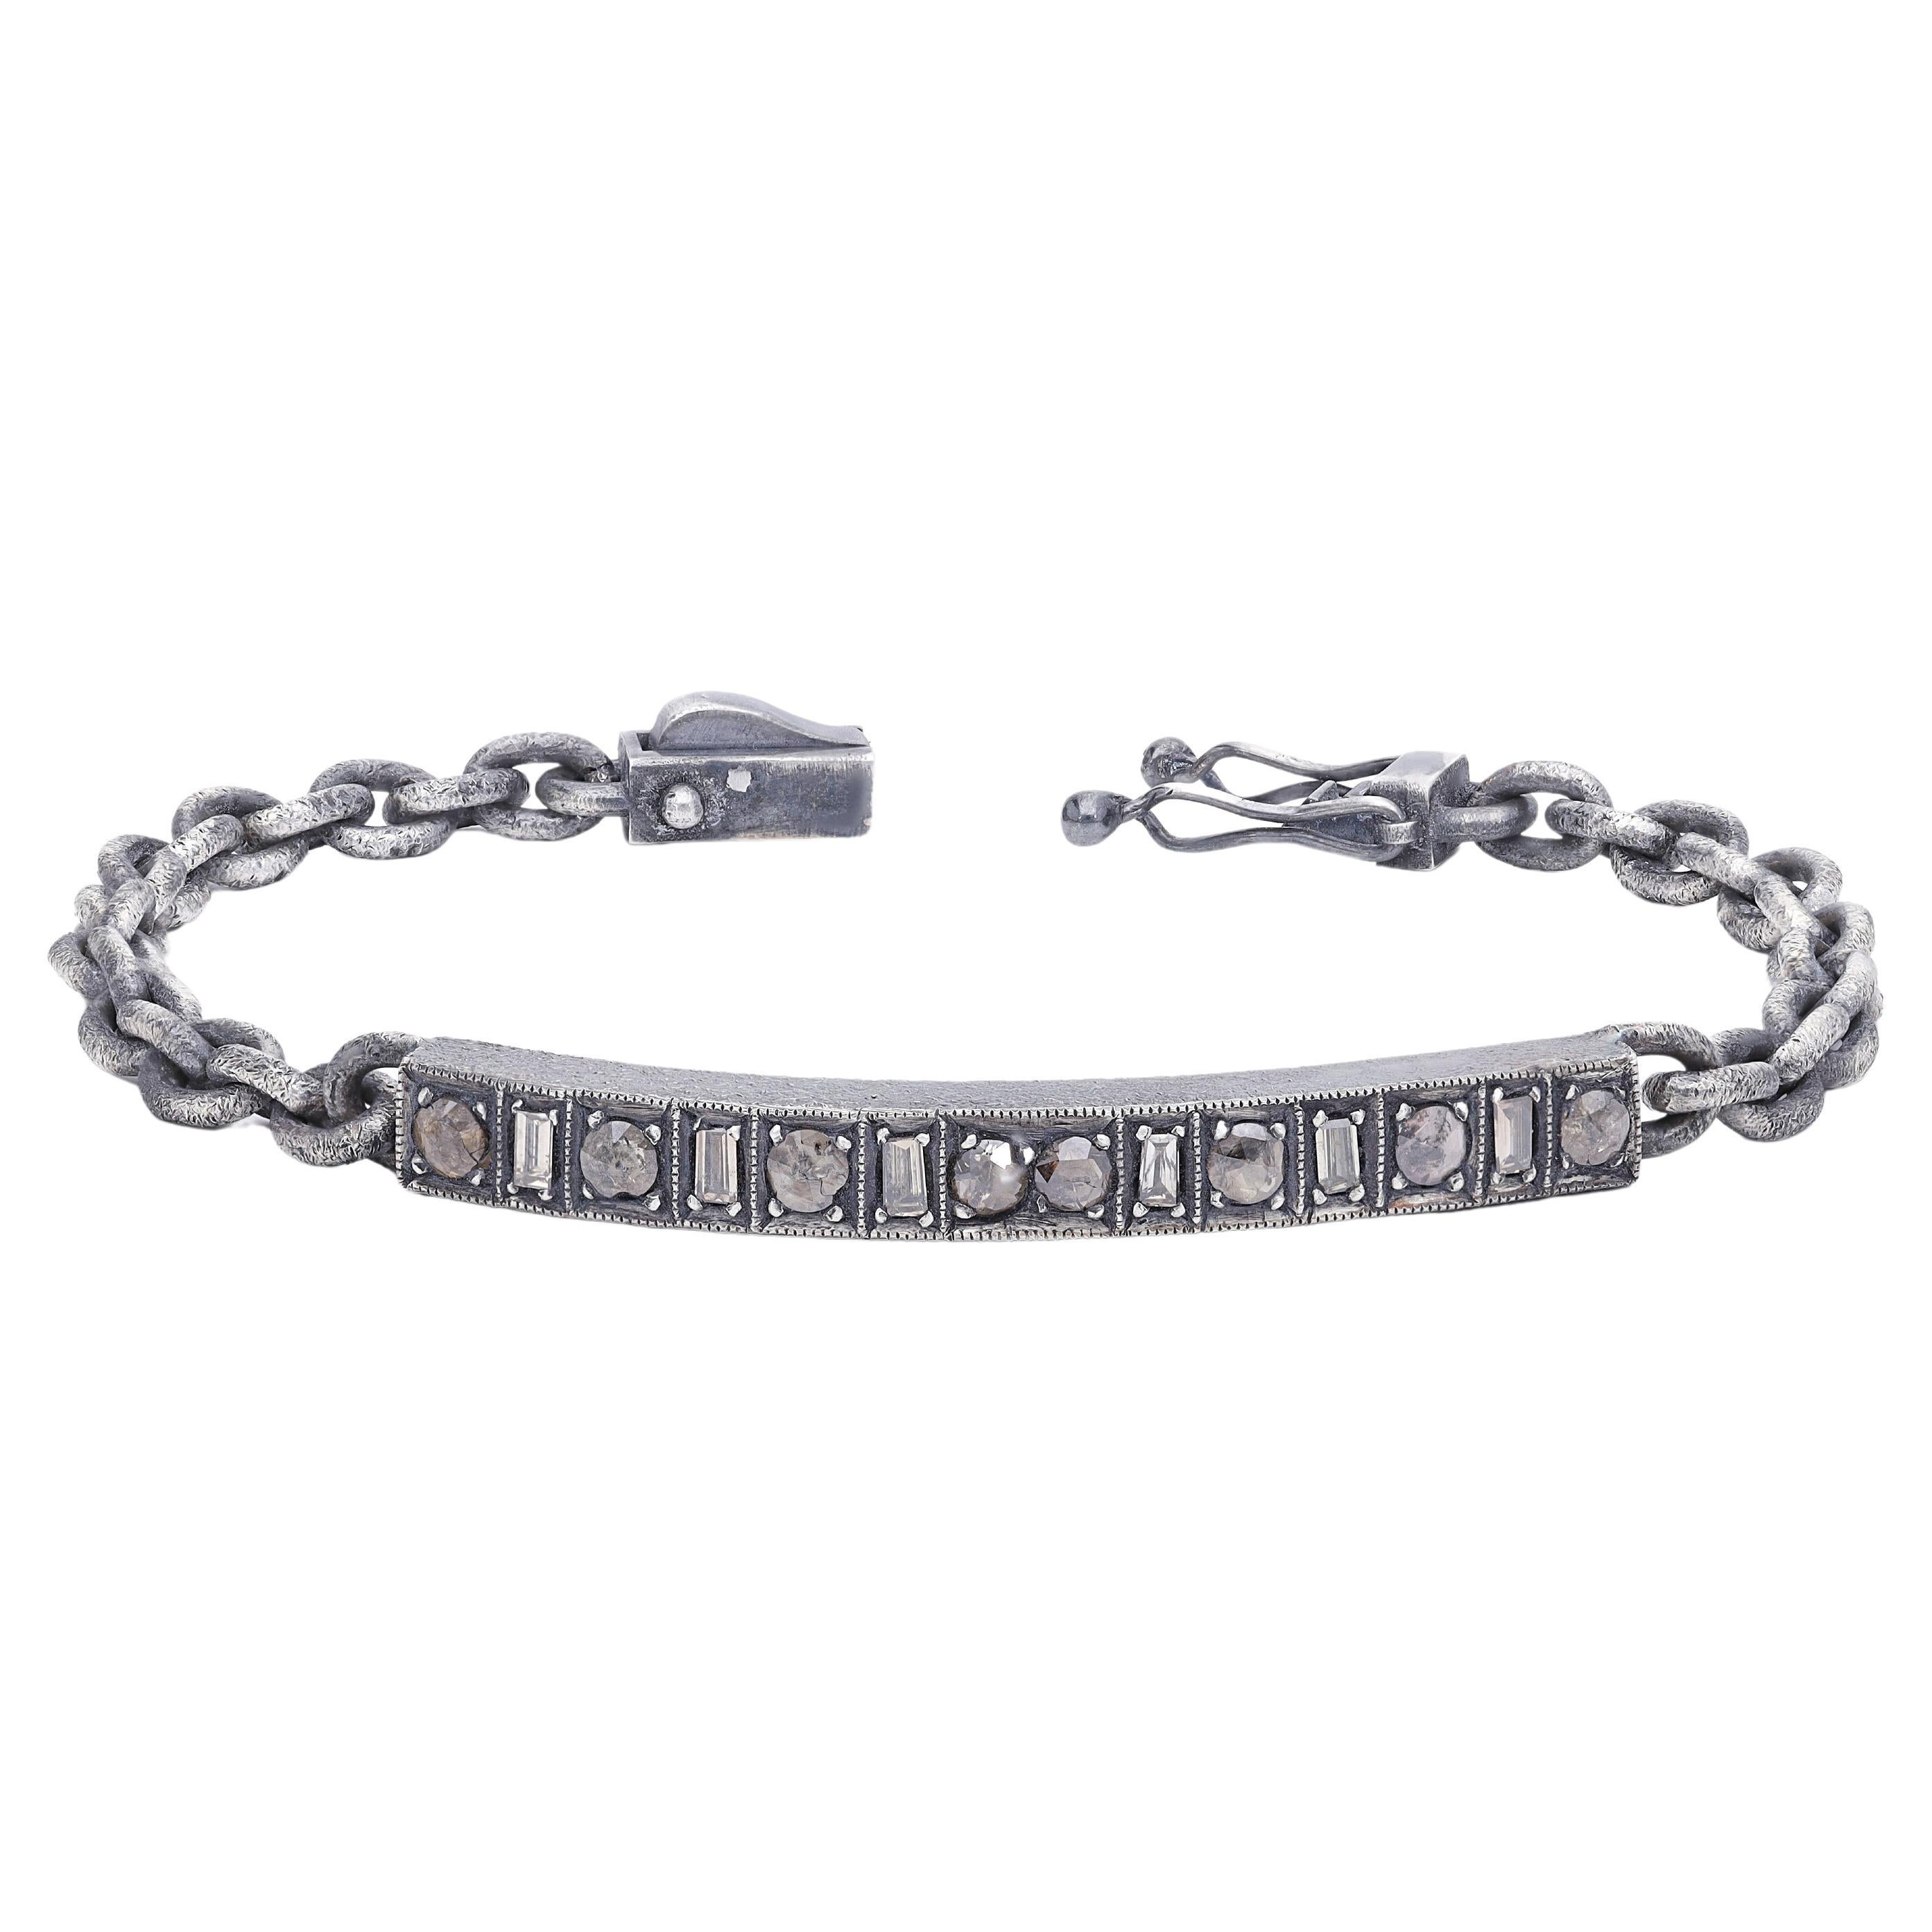  Oxidised Silver Tag Chain Bracelet with Rose Cut Diamonds and Baguette Diamonds